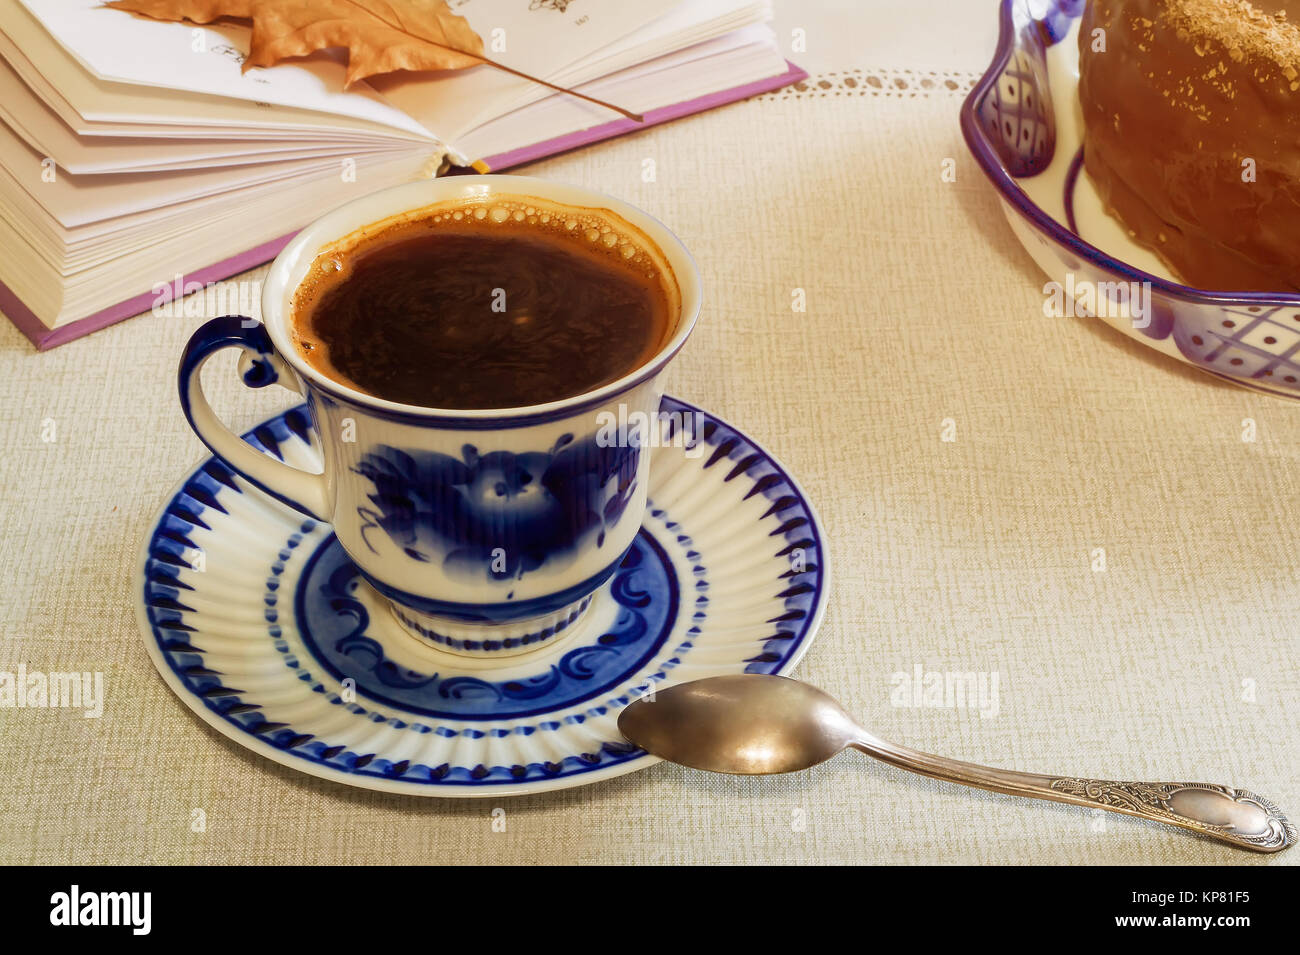 A Cup of black coffee and cake on the table. Stock Photo